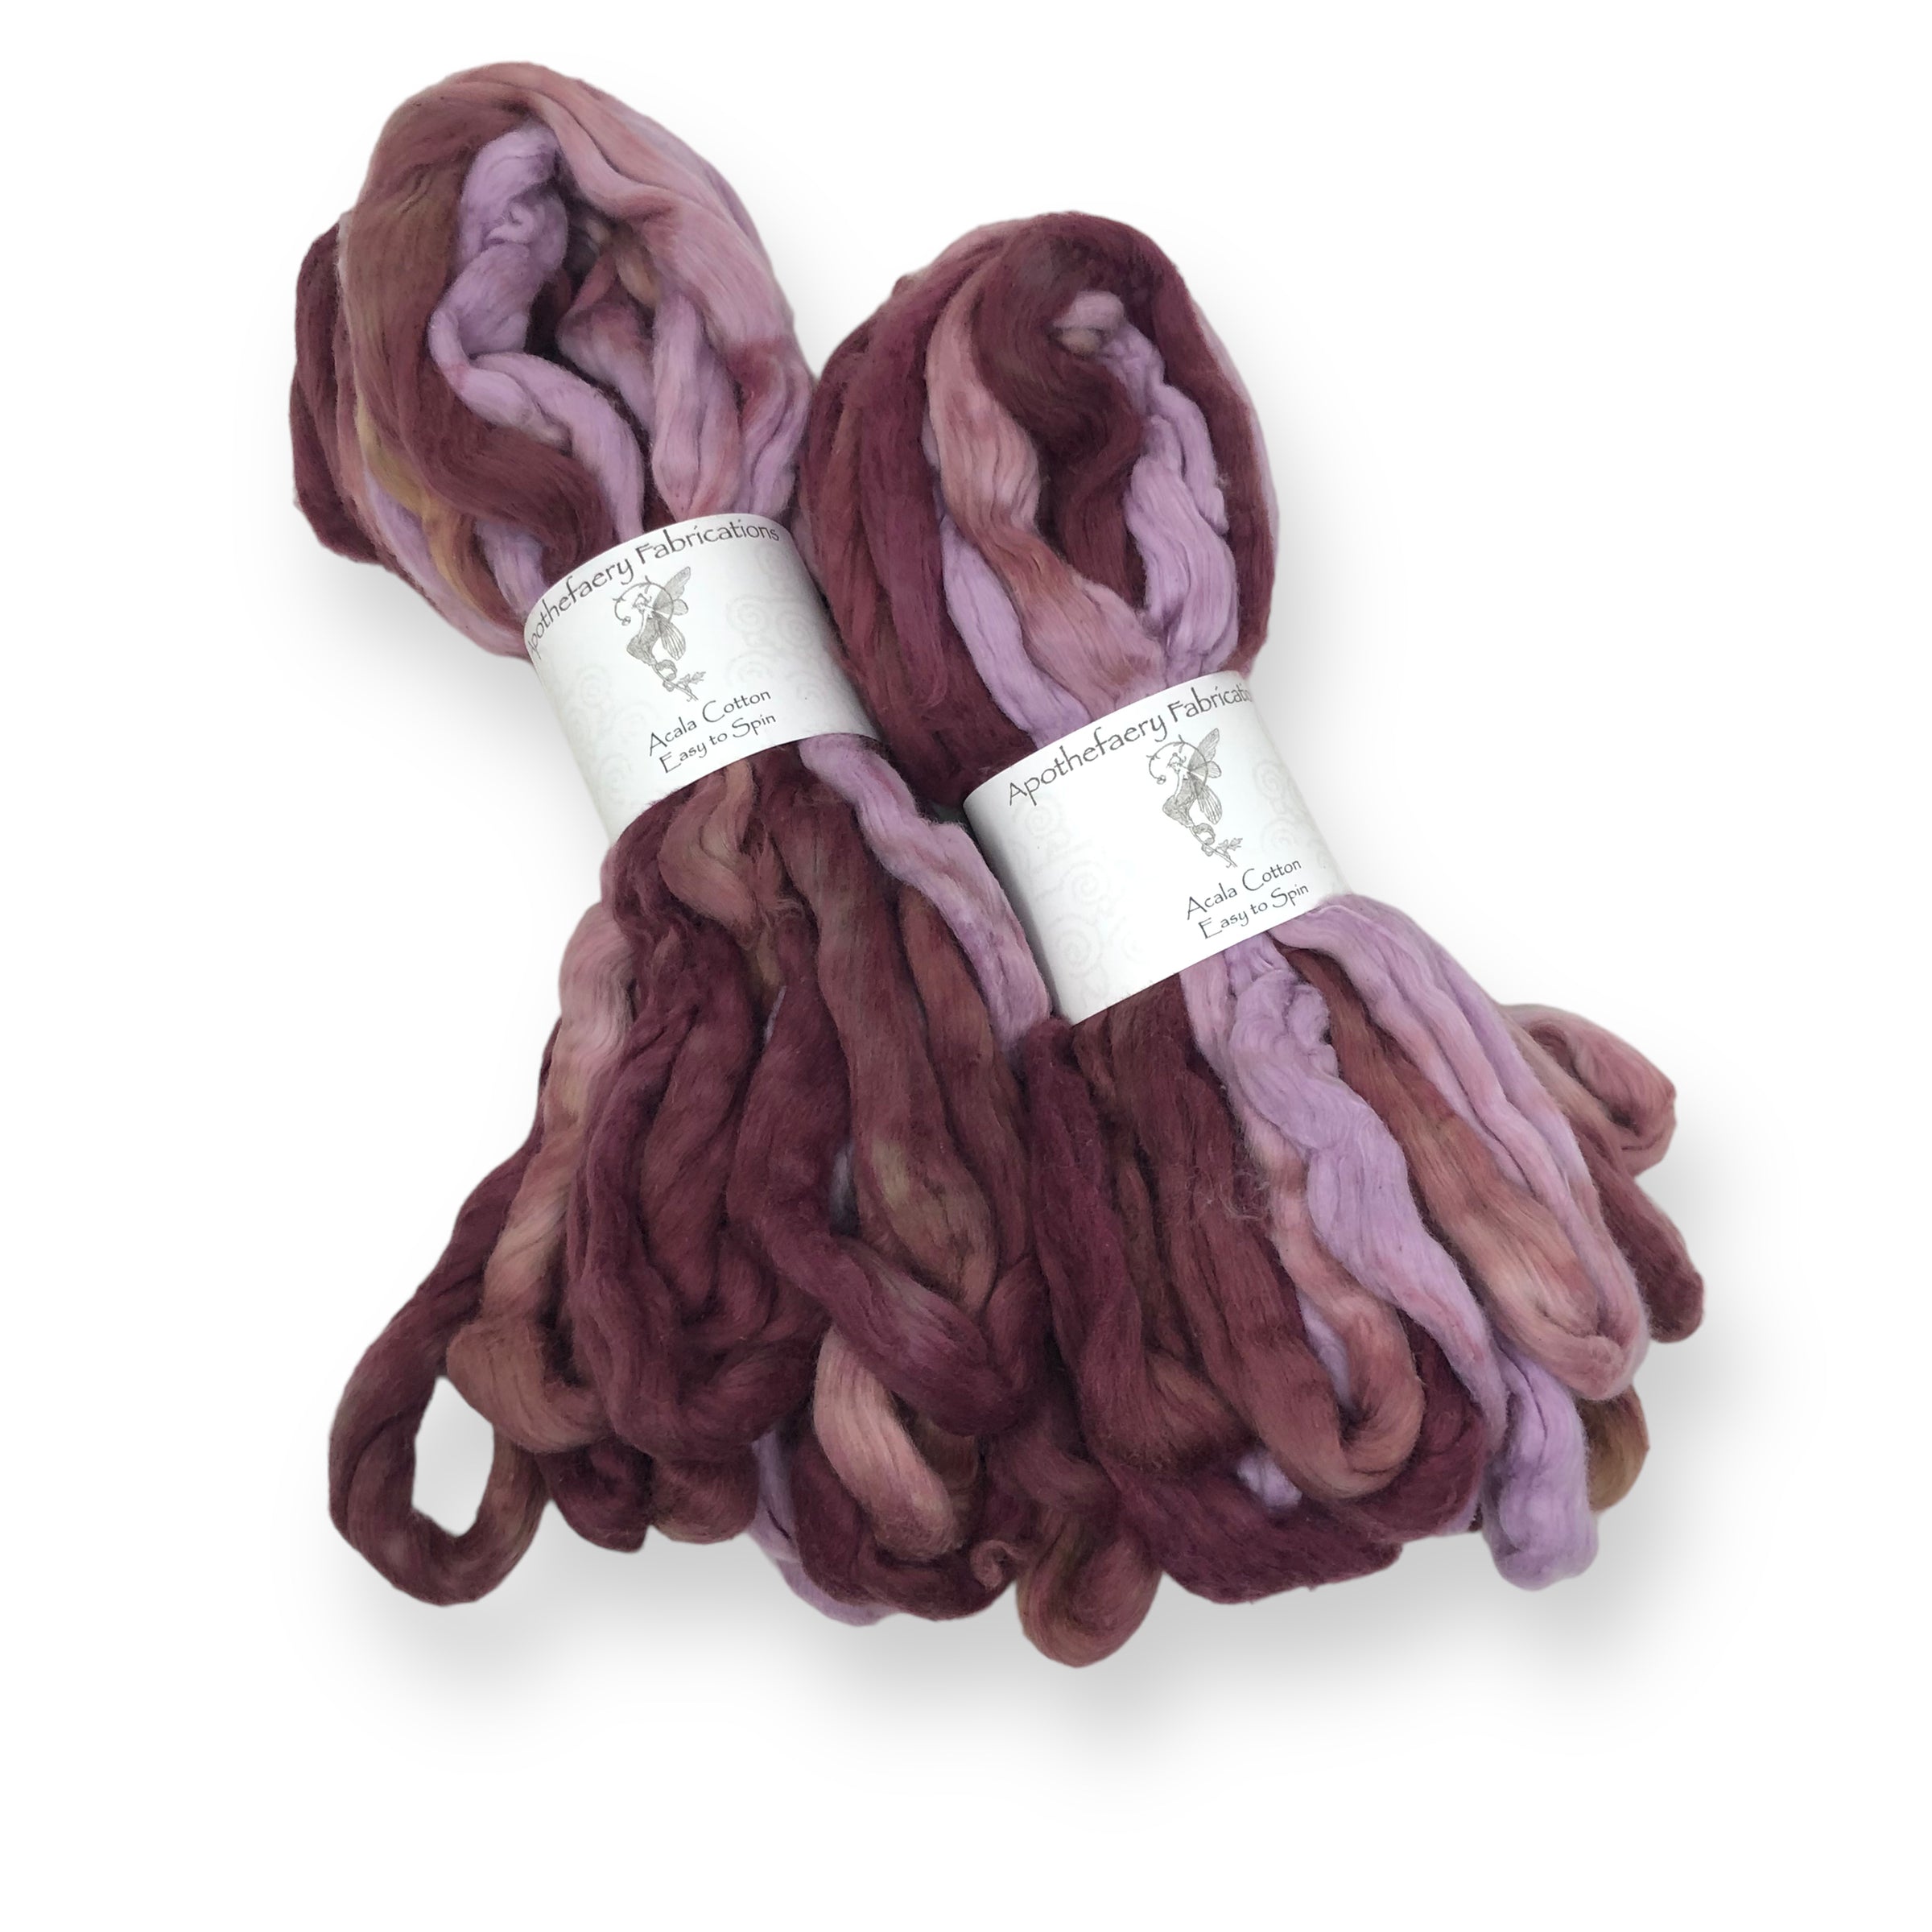 Ice Dyed Acala  - "Easy to Spin" USA grown Cotton